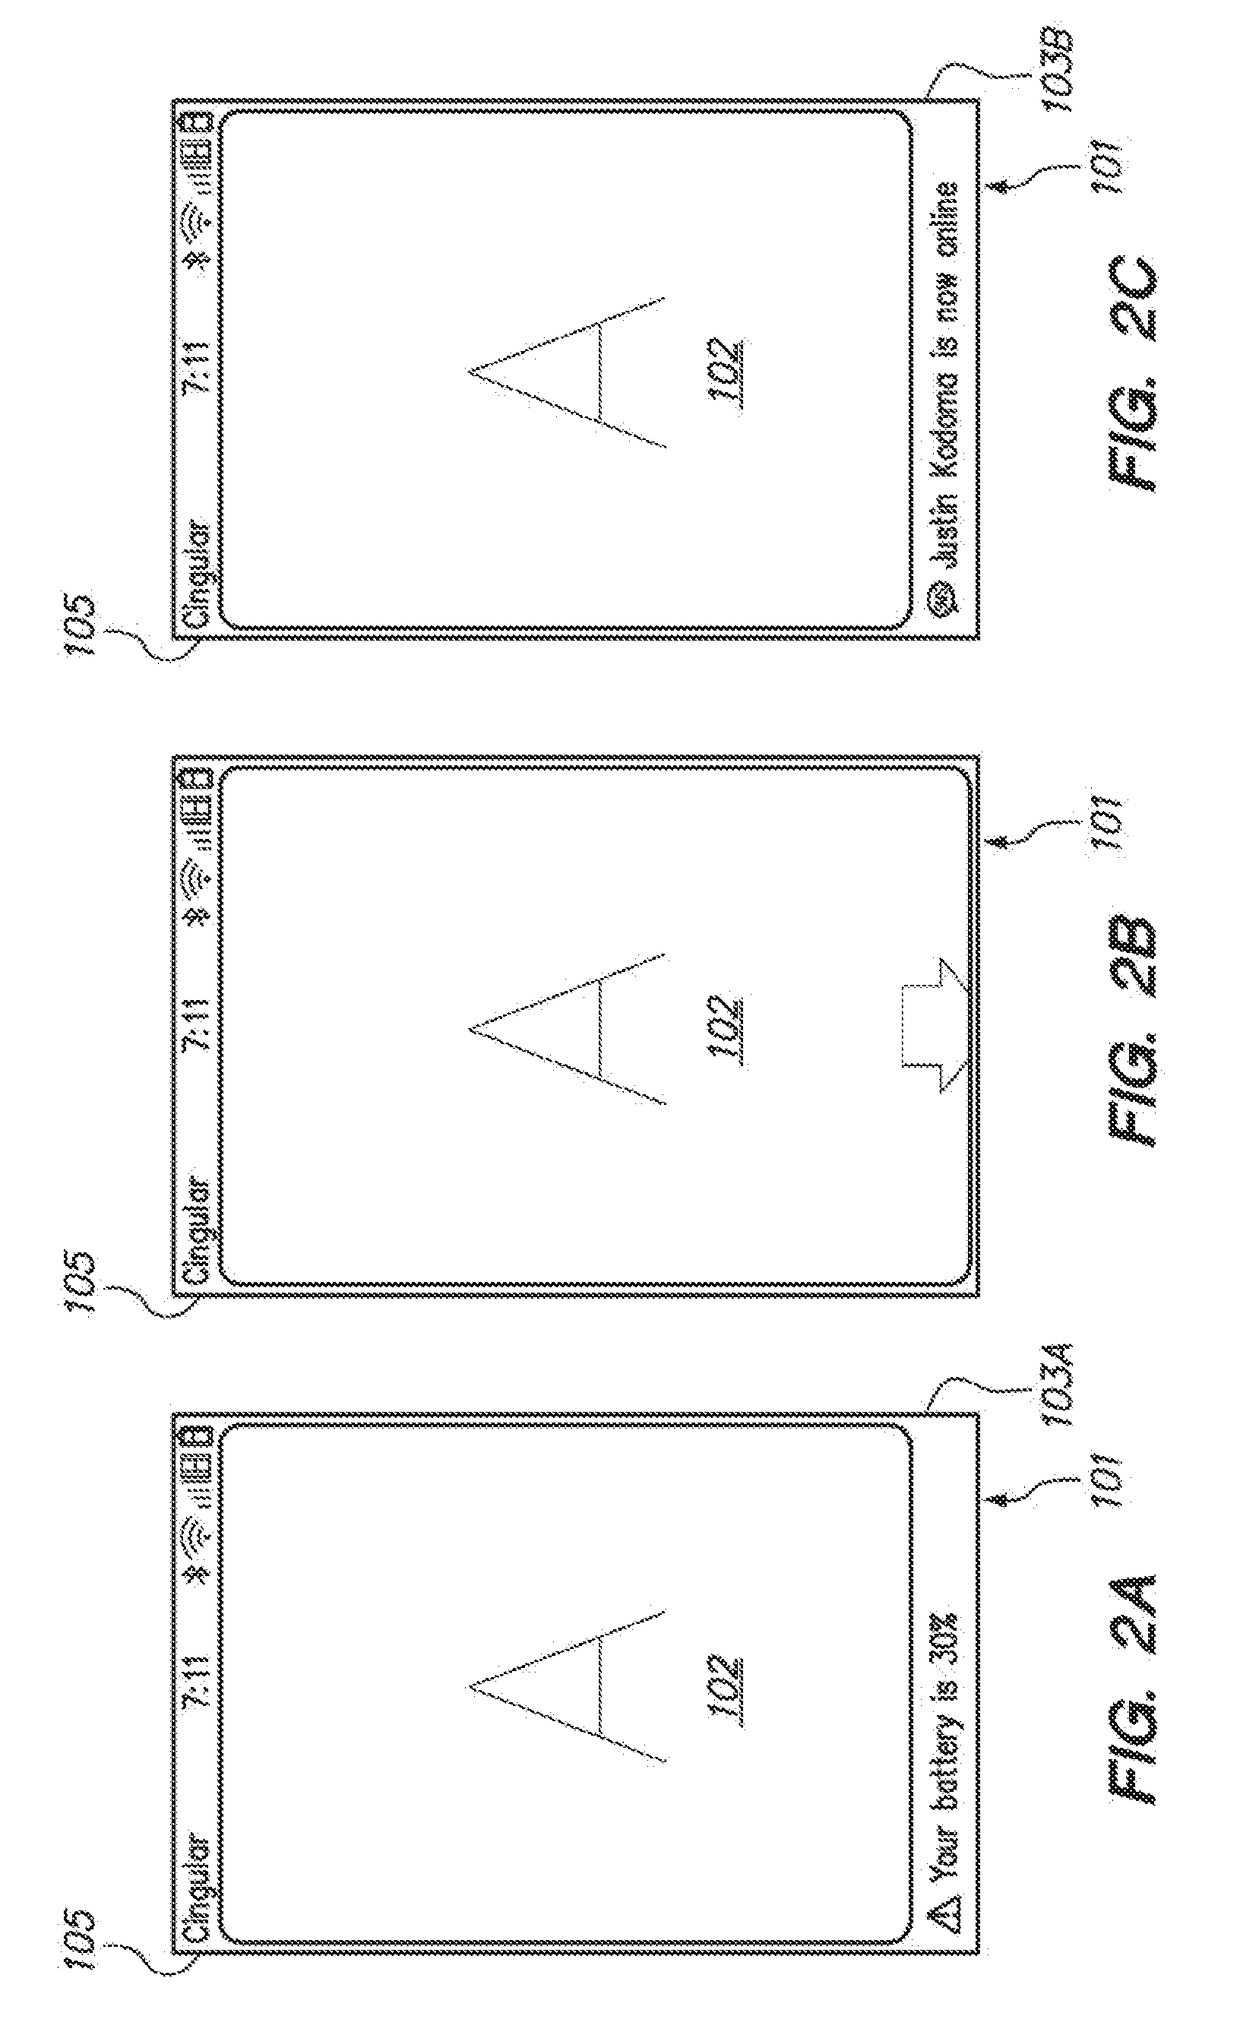 Notifying a user of events in a computing device